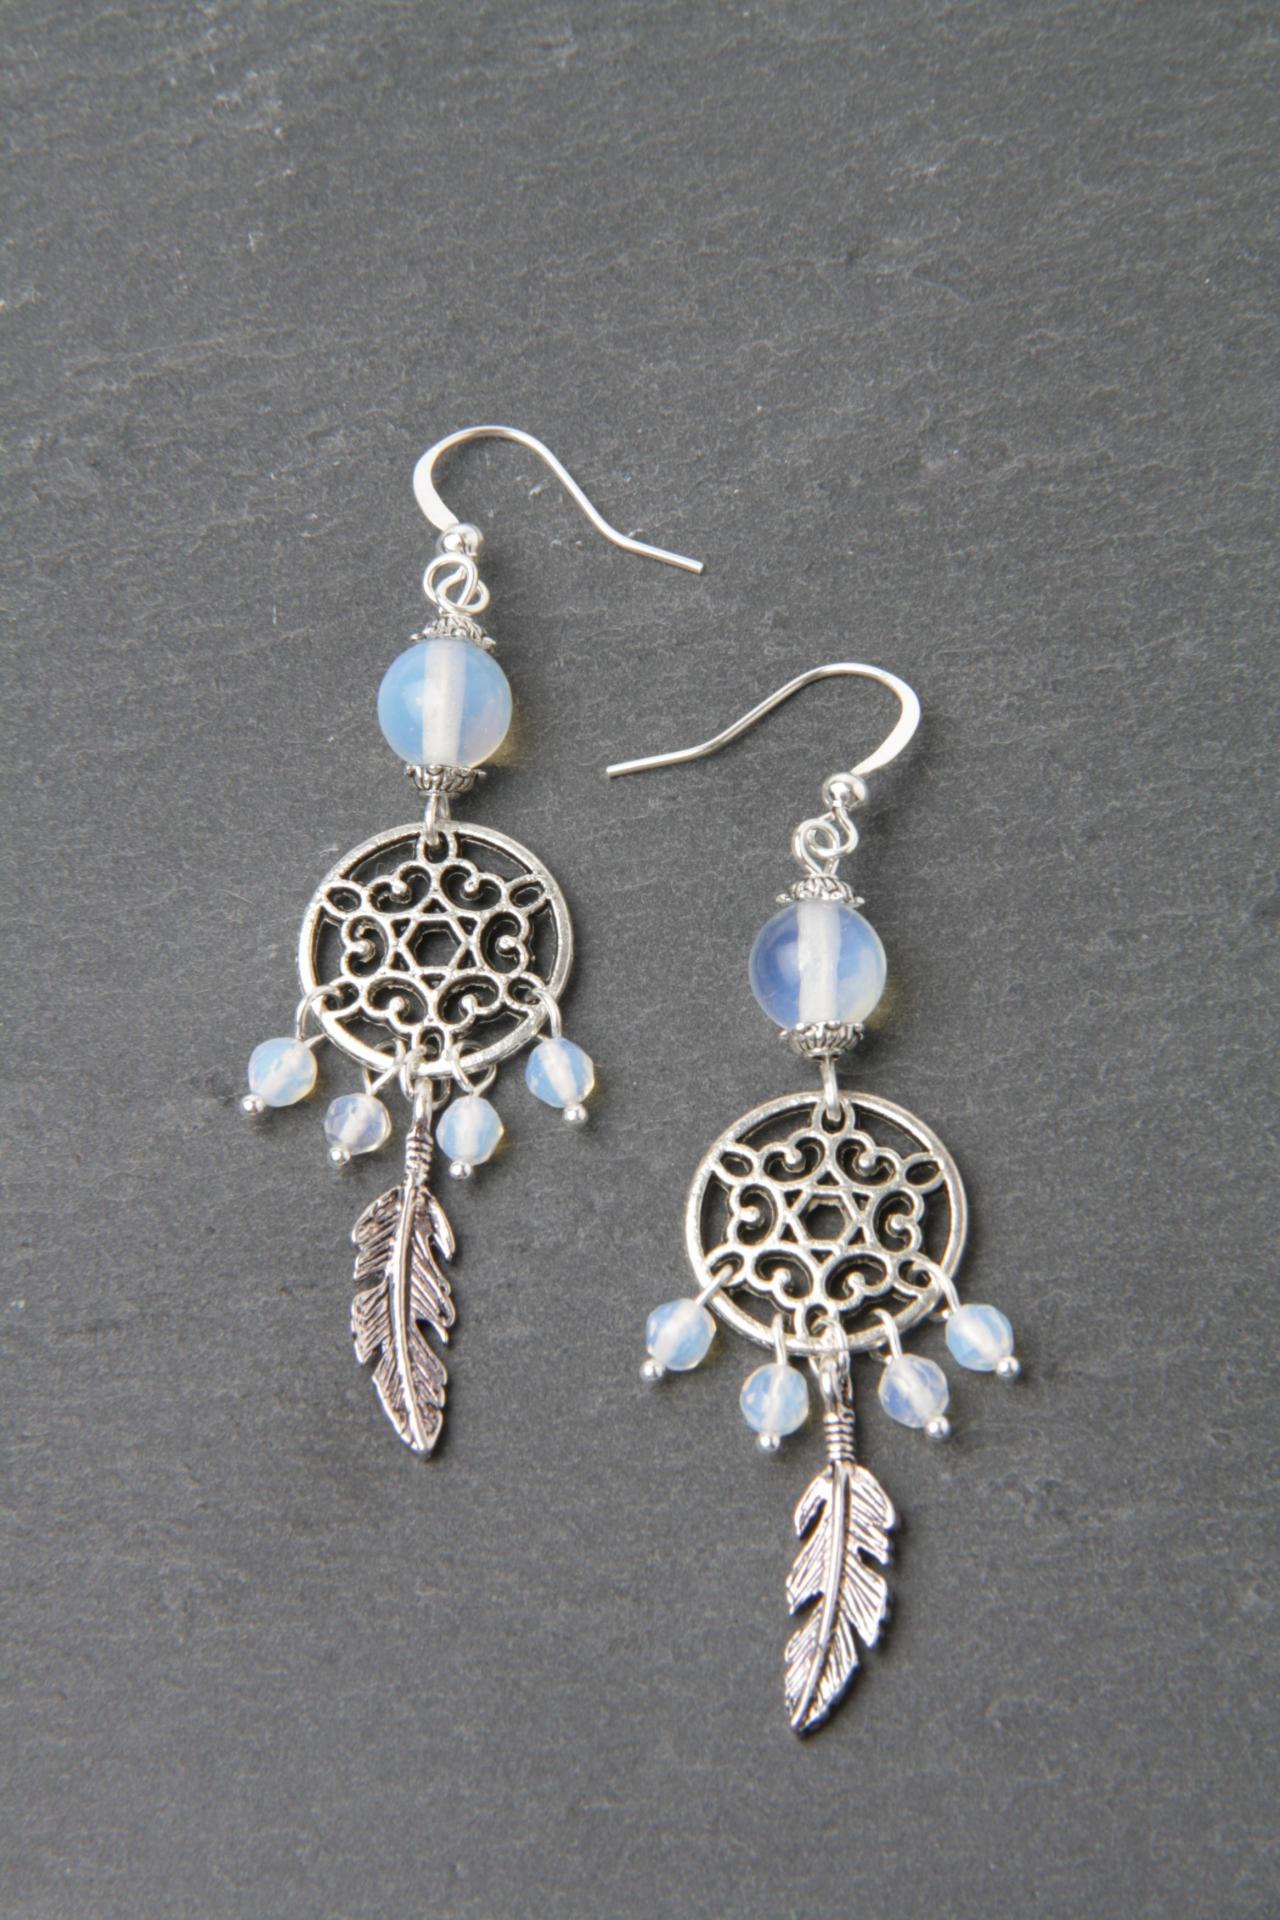 Dreamcatcher Earrings, Moonstone Earrings, Feather Earrings, Silver And Moonstone Jewelry, Made In Canada, Gypsy, Boho, Gift For Her, Opal